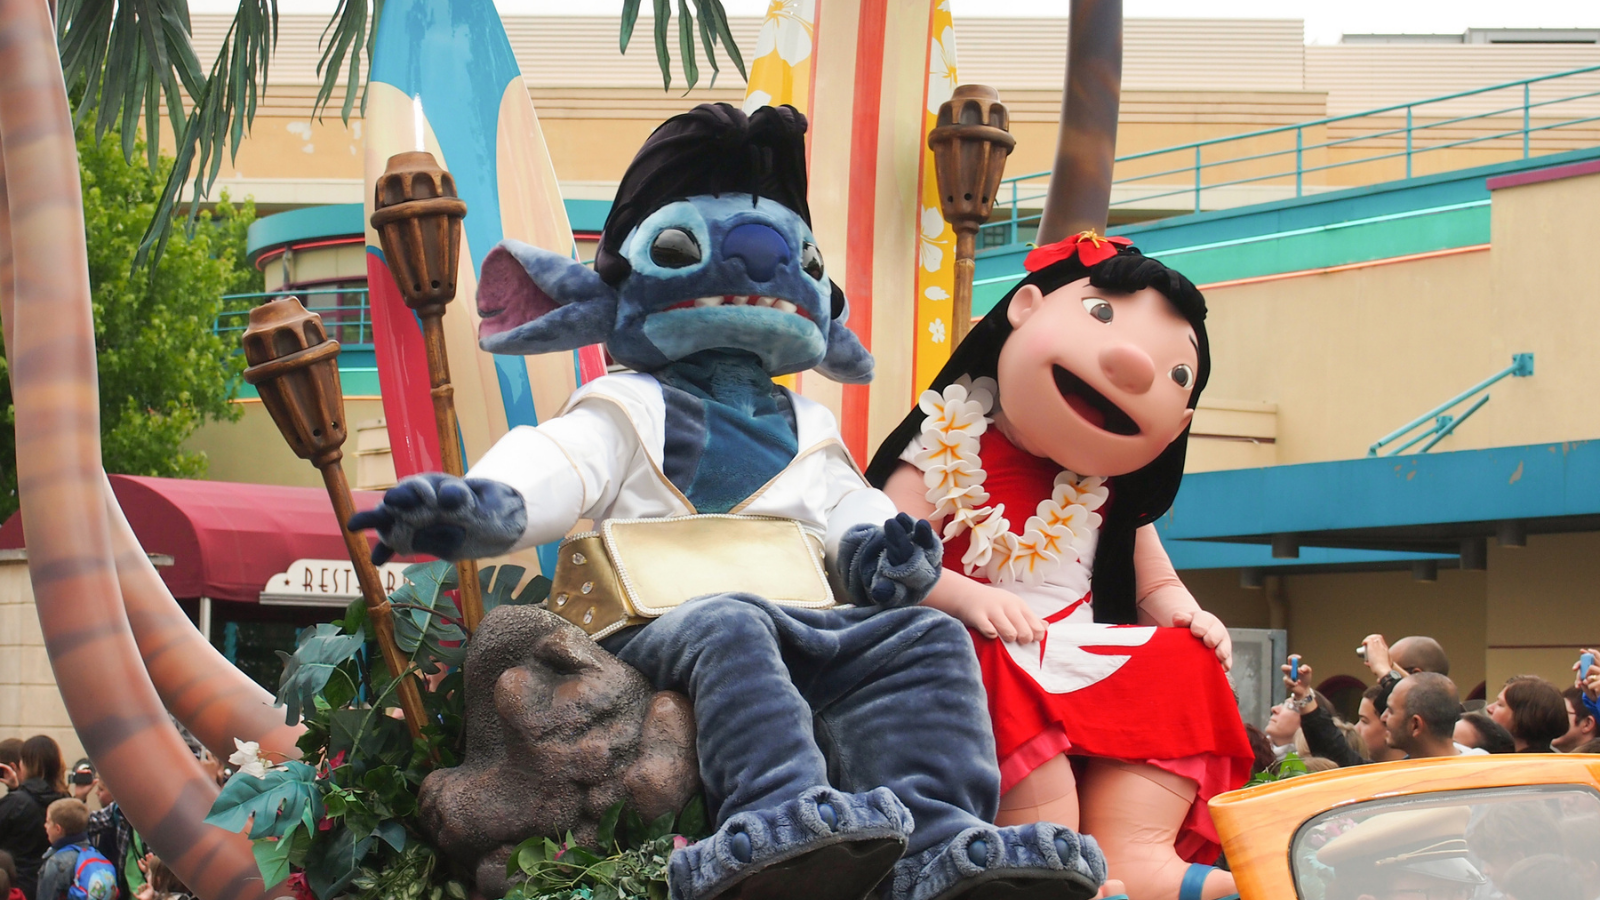 Two people dressed as Disney's Lilo & Stitch characters.